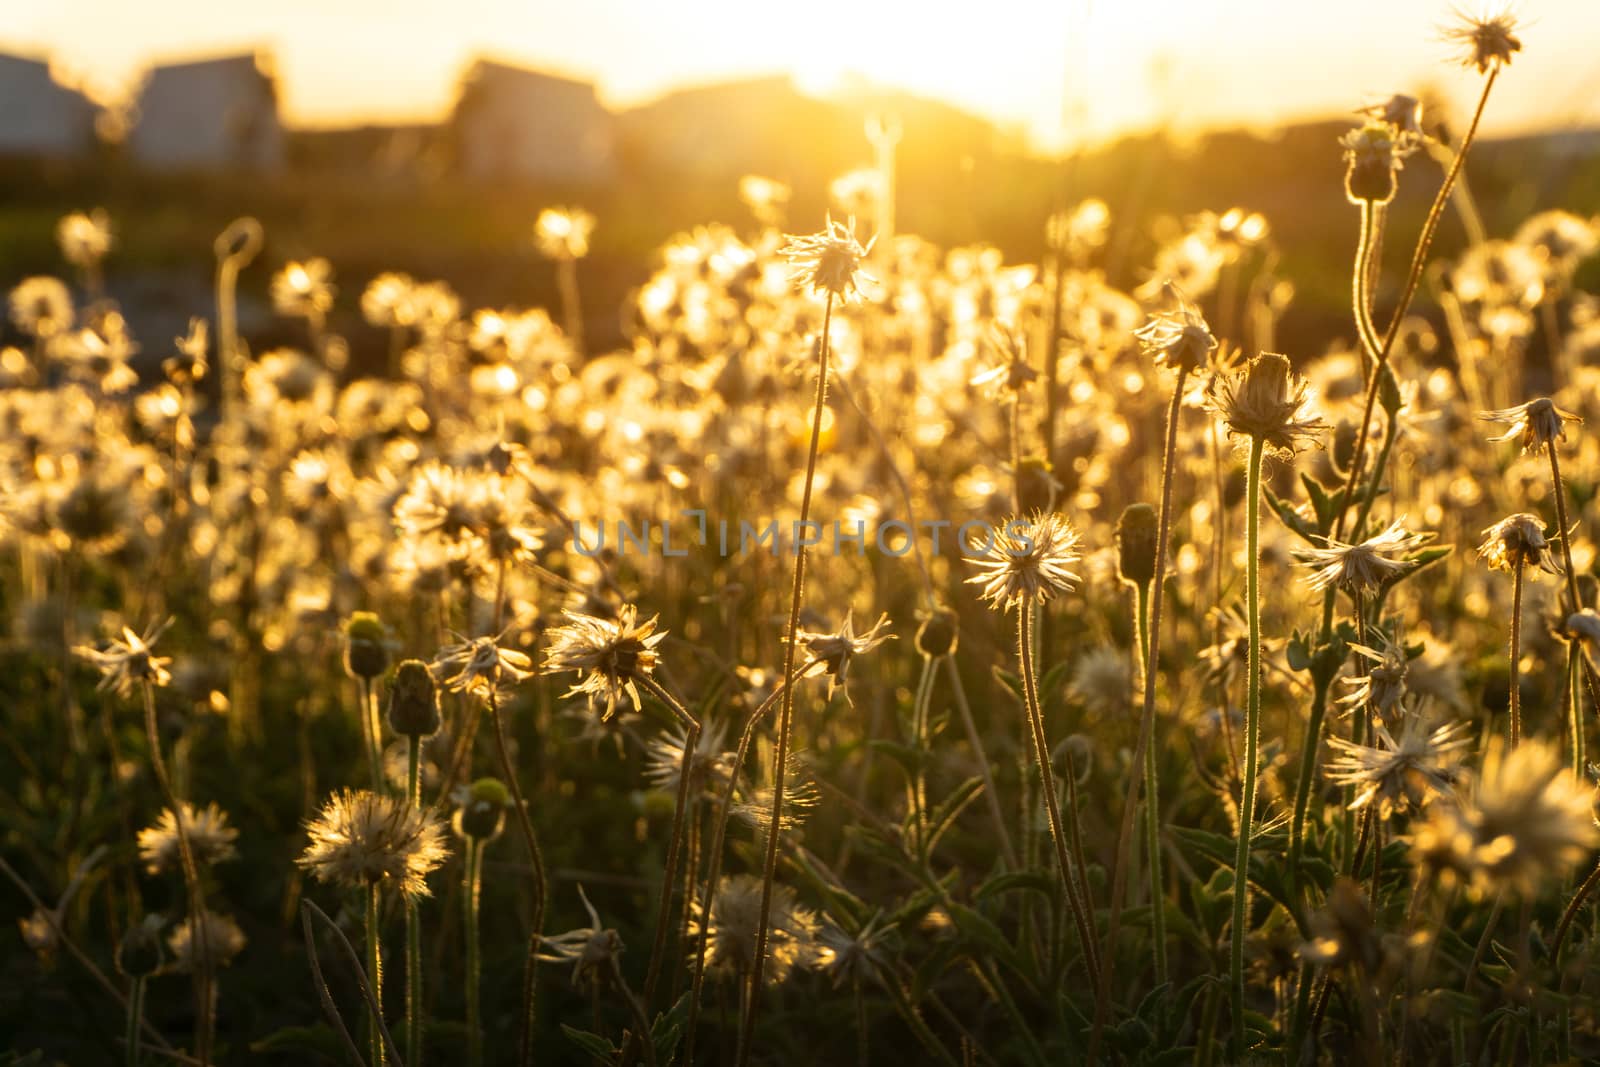 Asia Wild Grass flowers in sunset time by pkproject